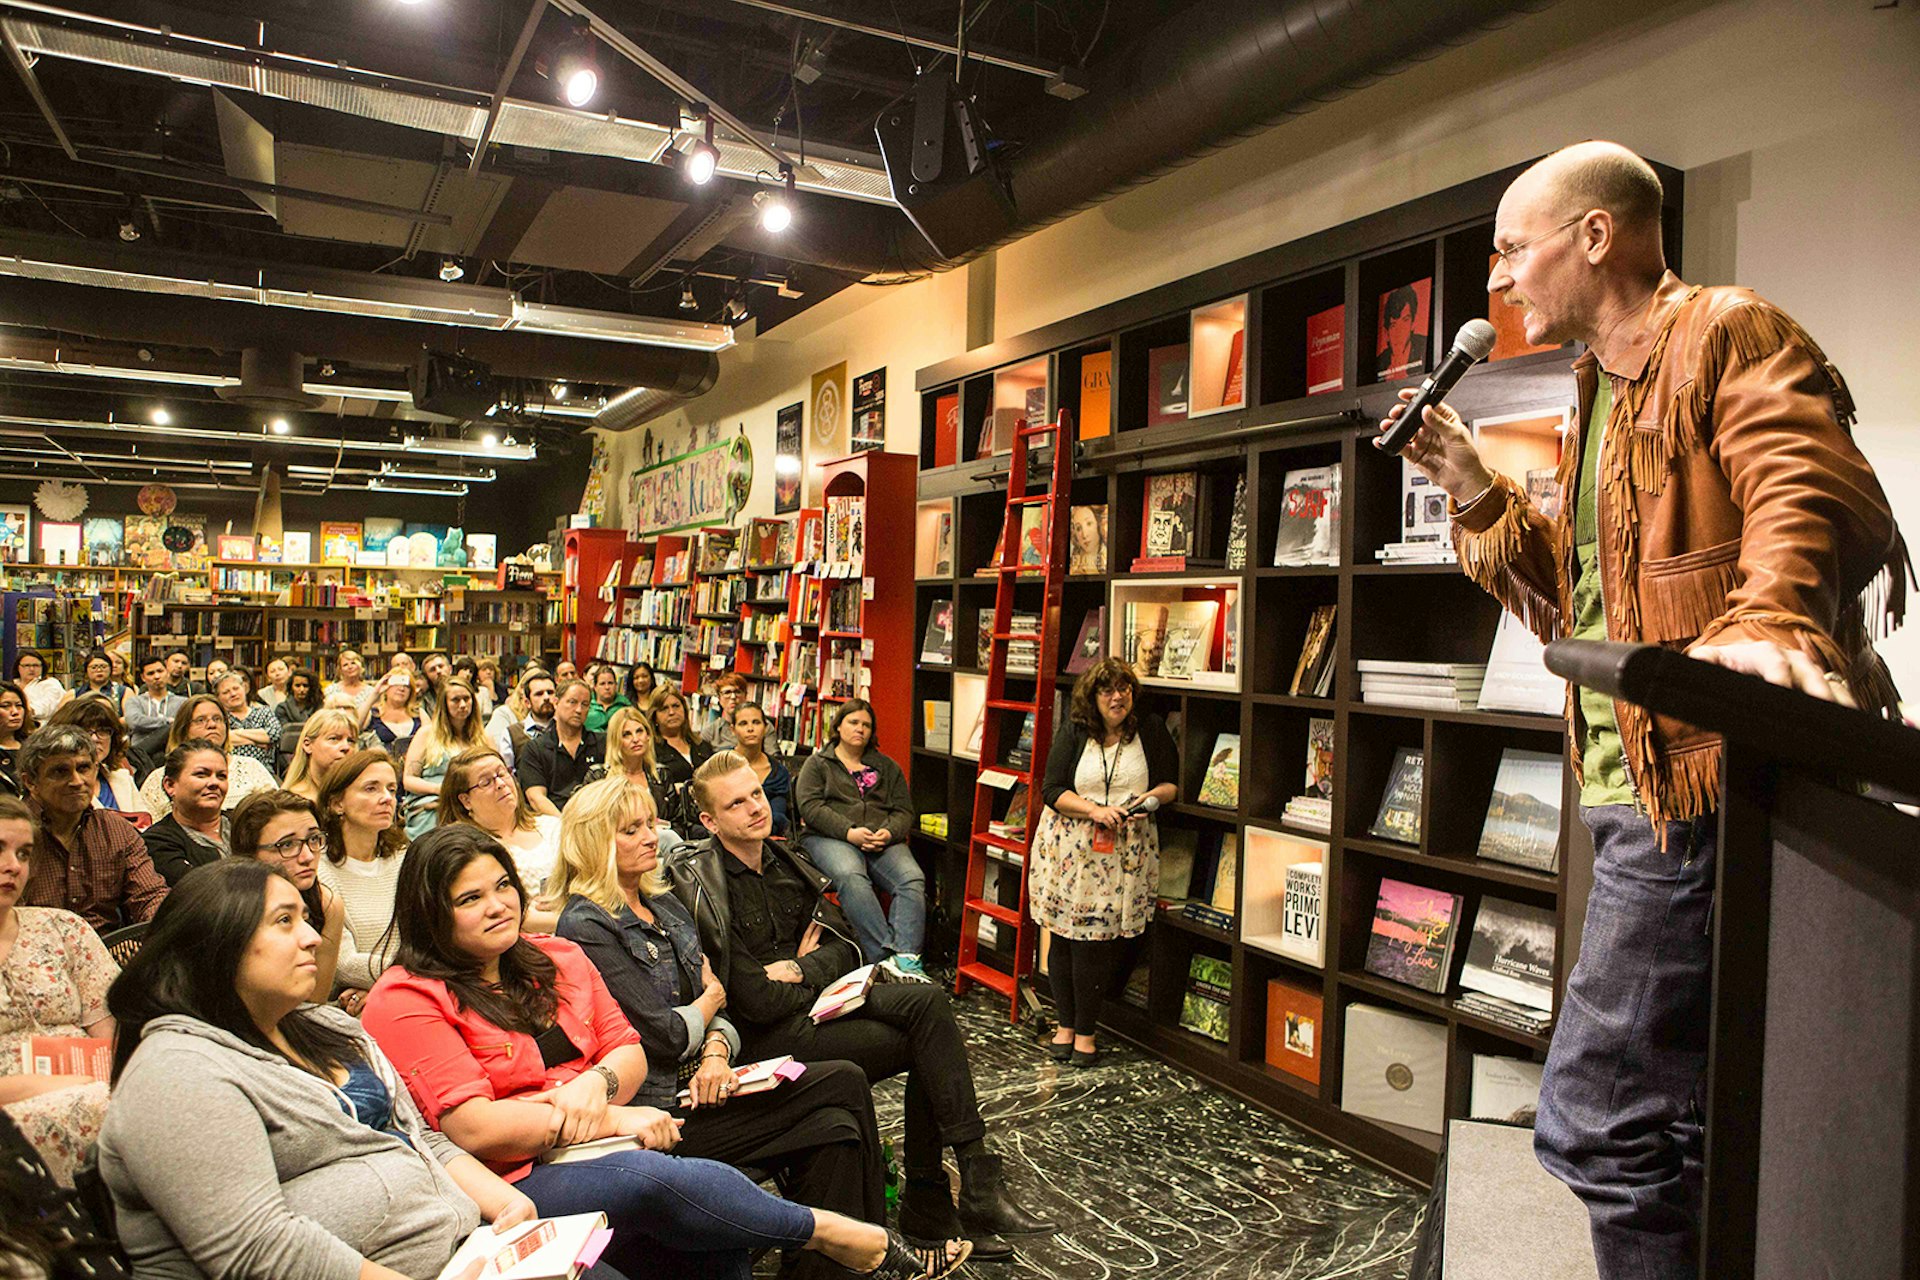 male author holding microphone speaks to audience in a bookshop